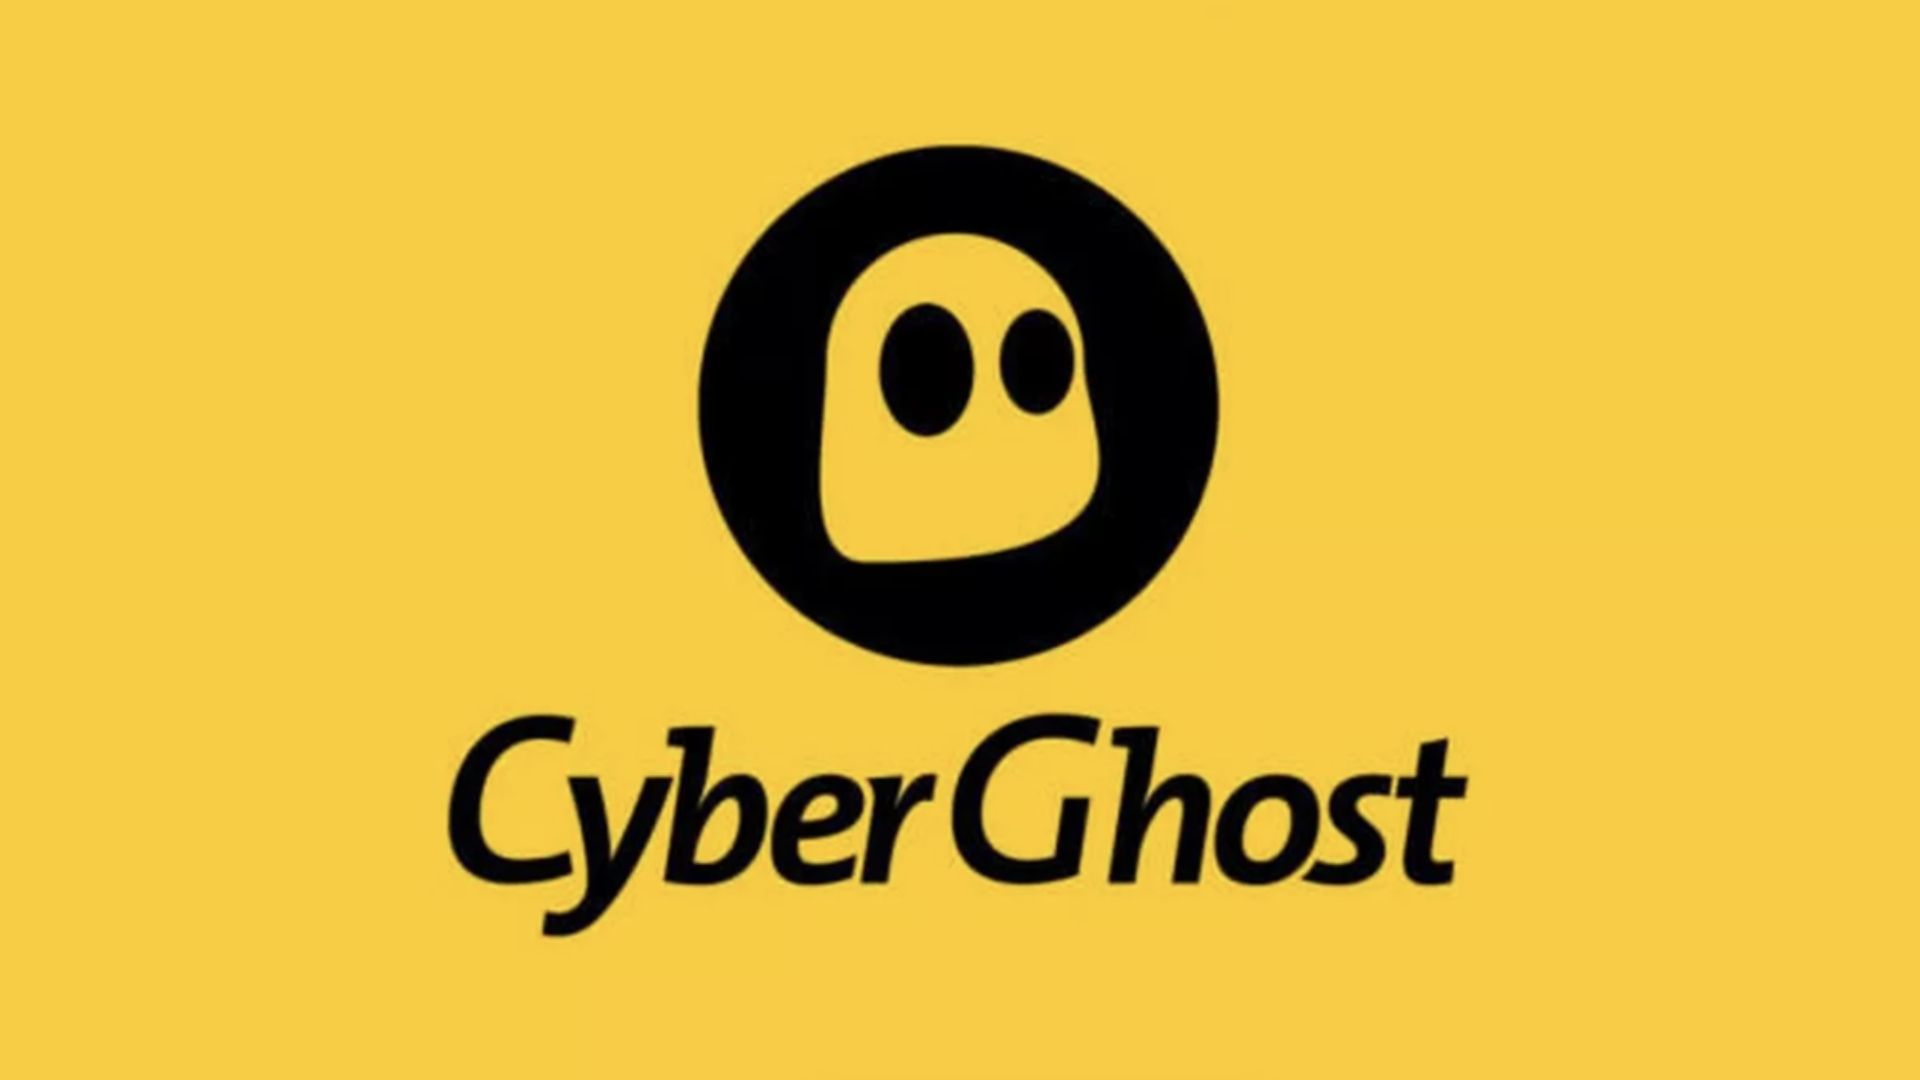 VPN servers for CyberGhost. Image shows the company logo.